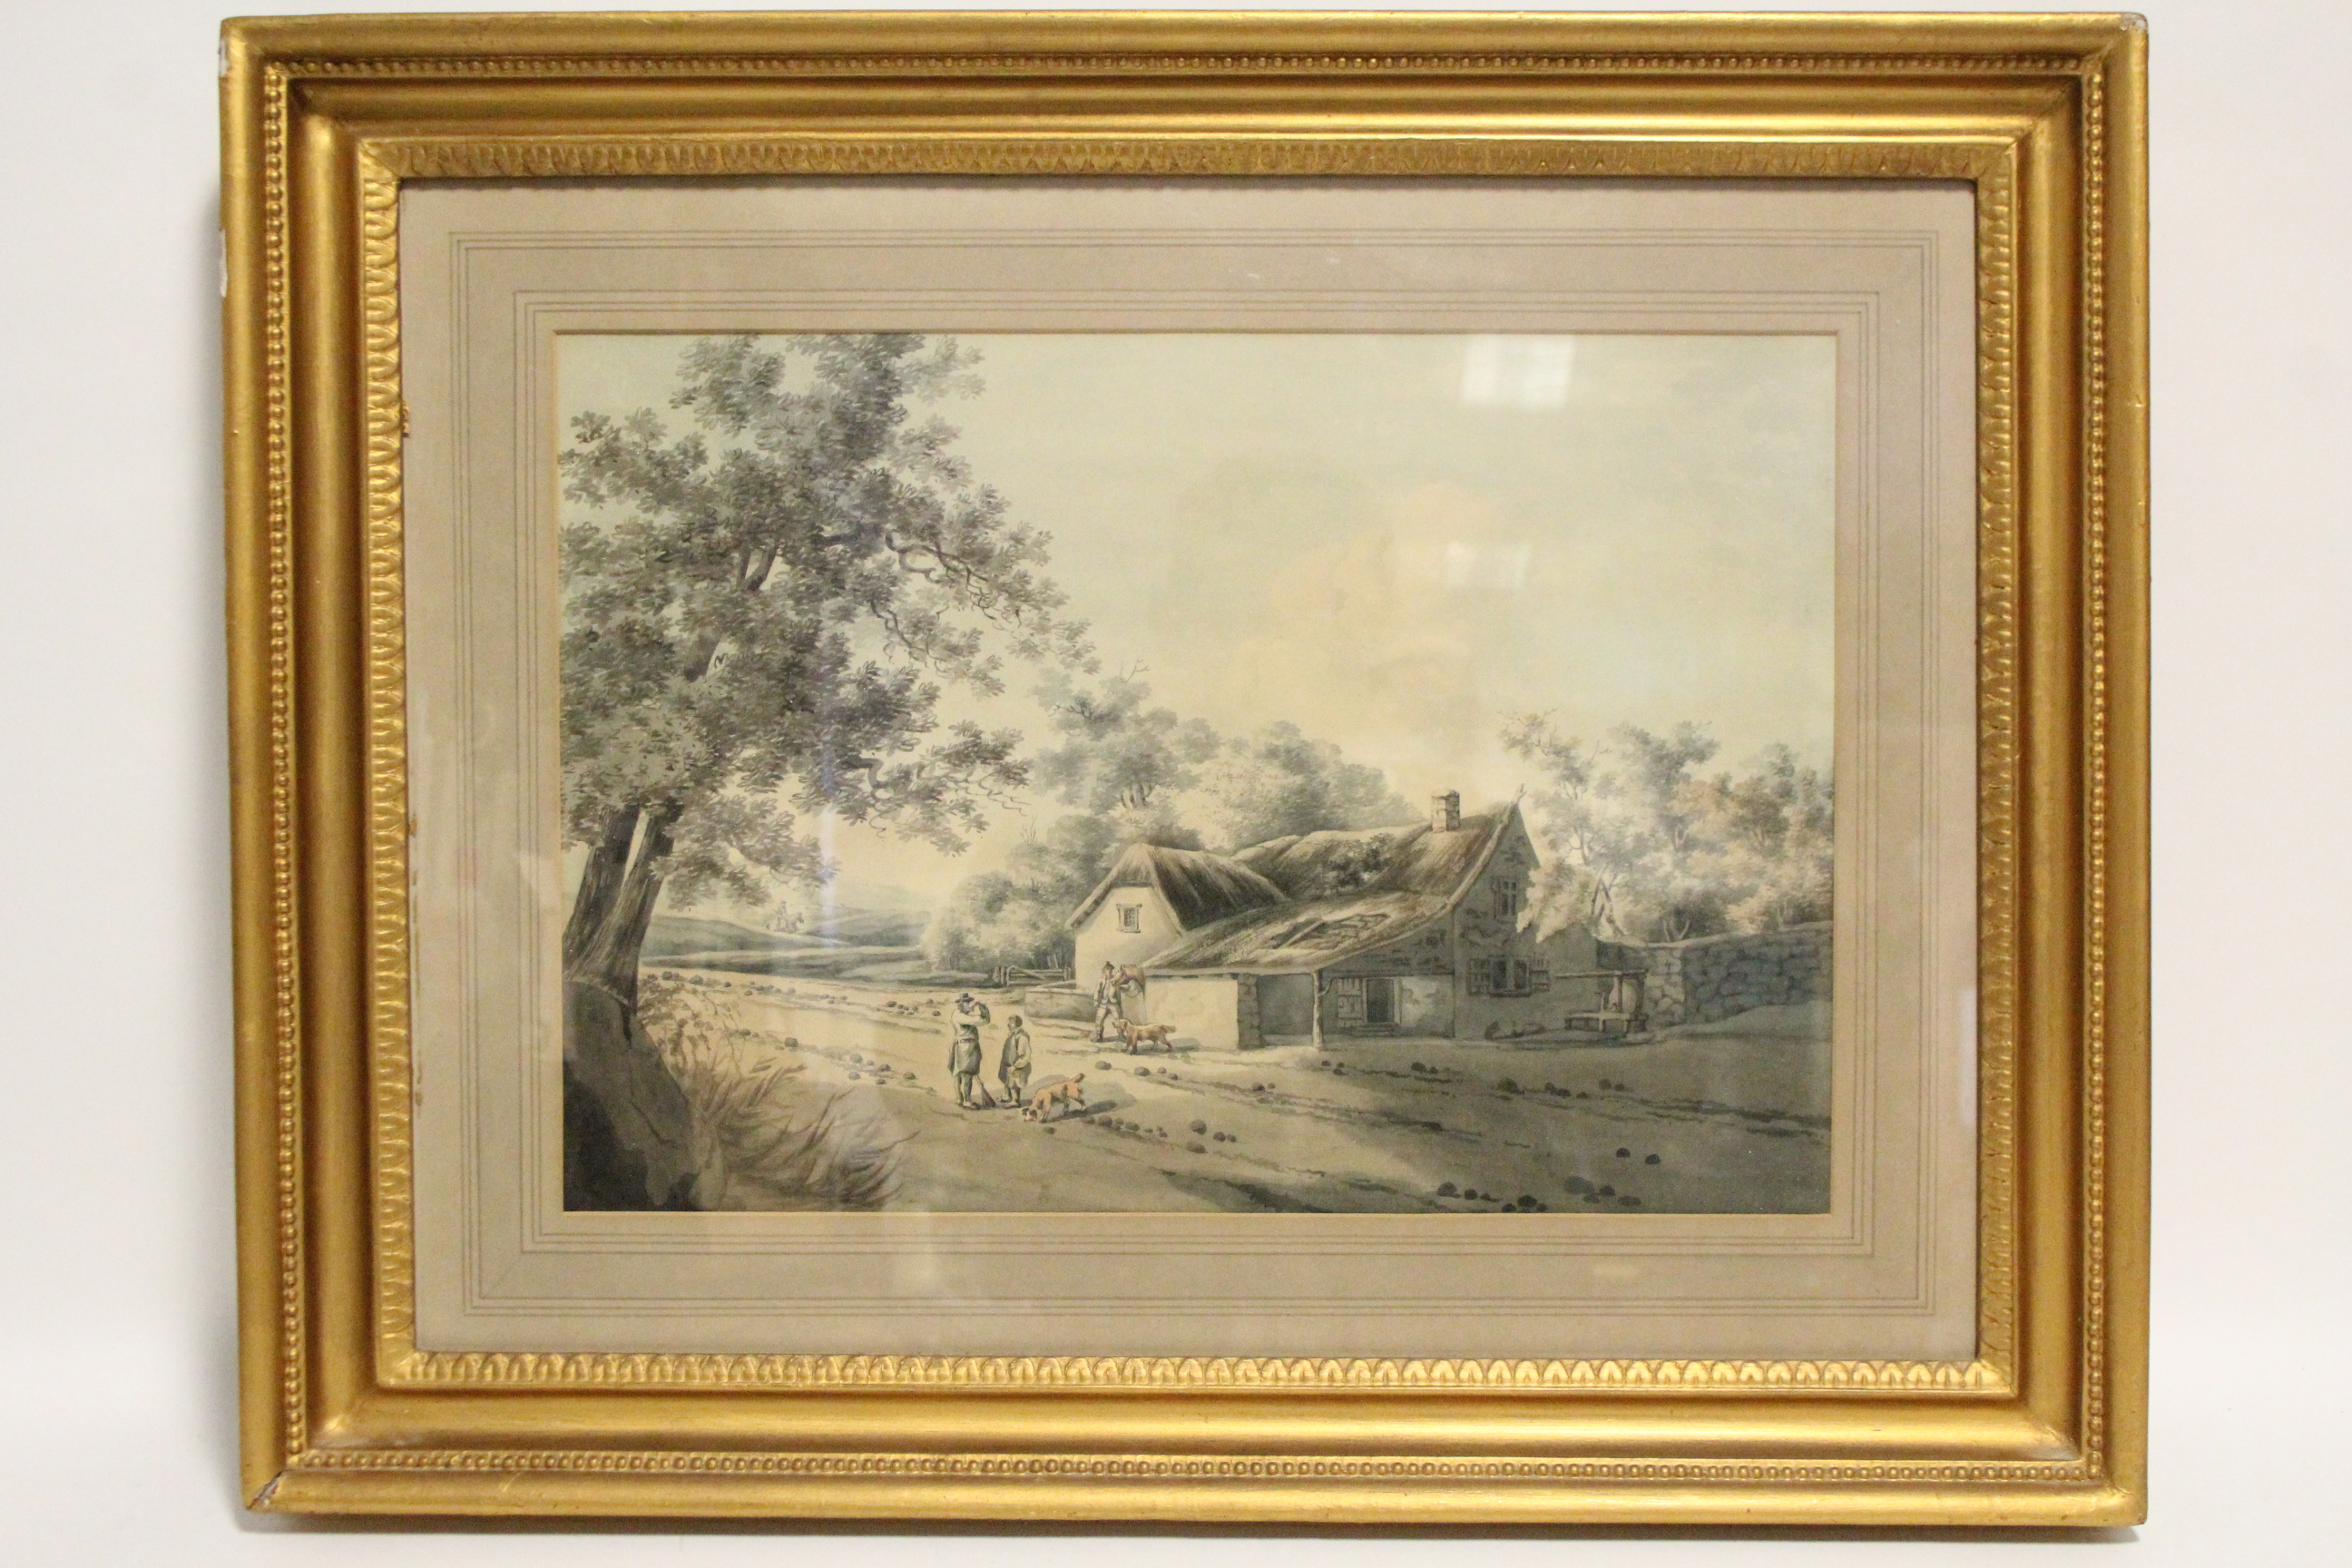 HASSELL, John (1767-1825). A pair of landscapes in the Isle of Wight, i) a thatched cottage with - Image 2 of 4